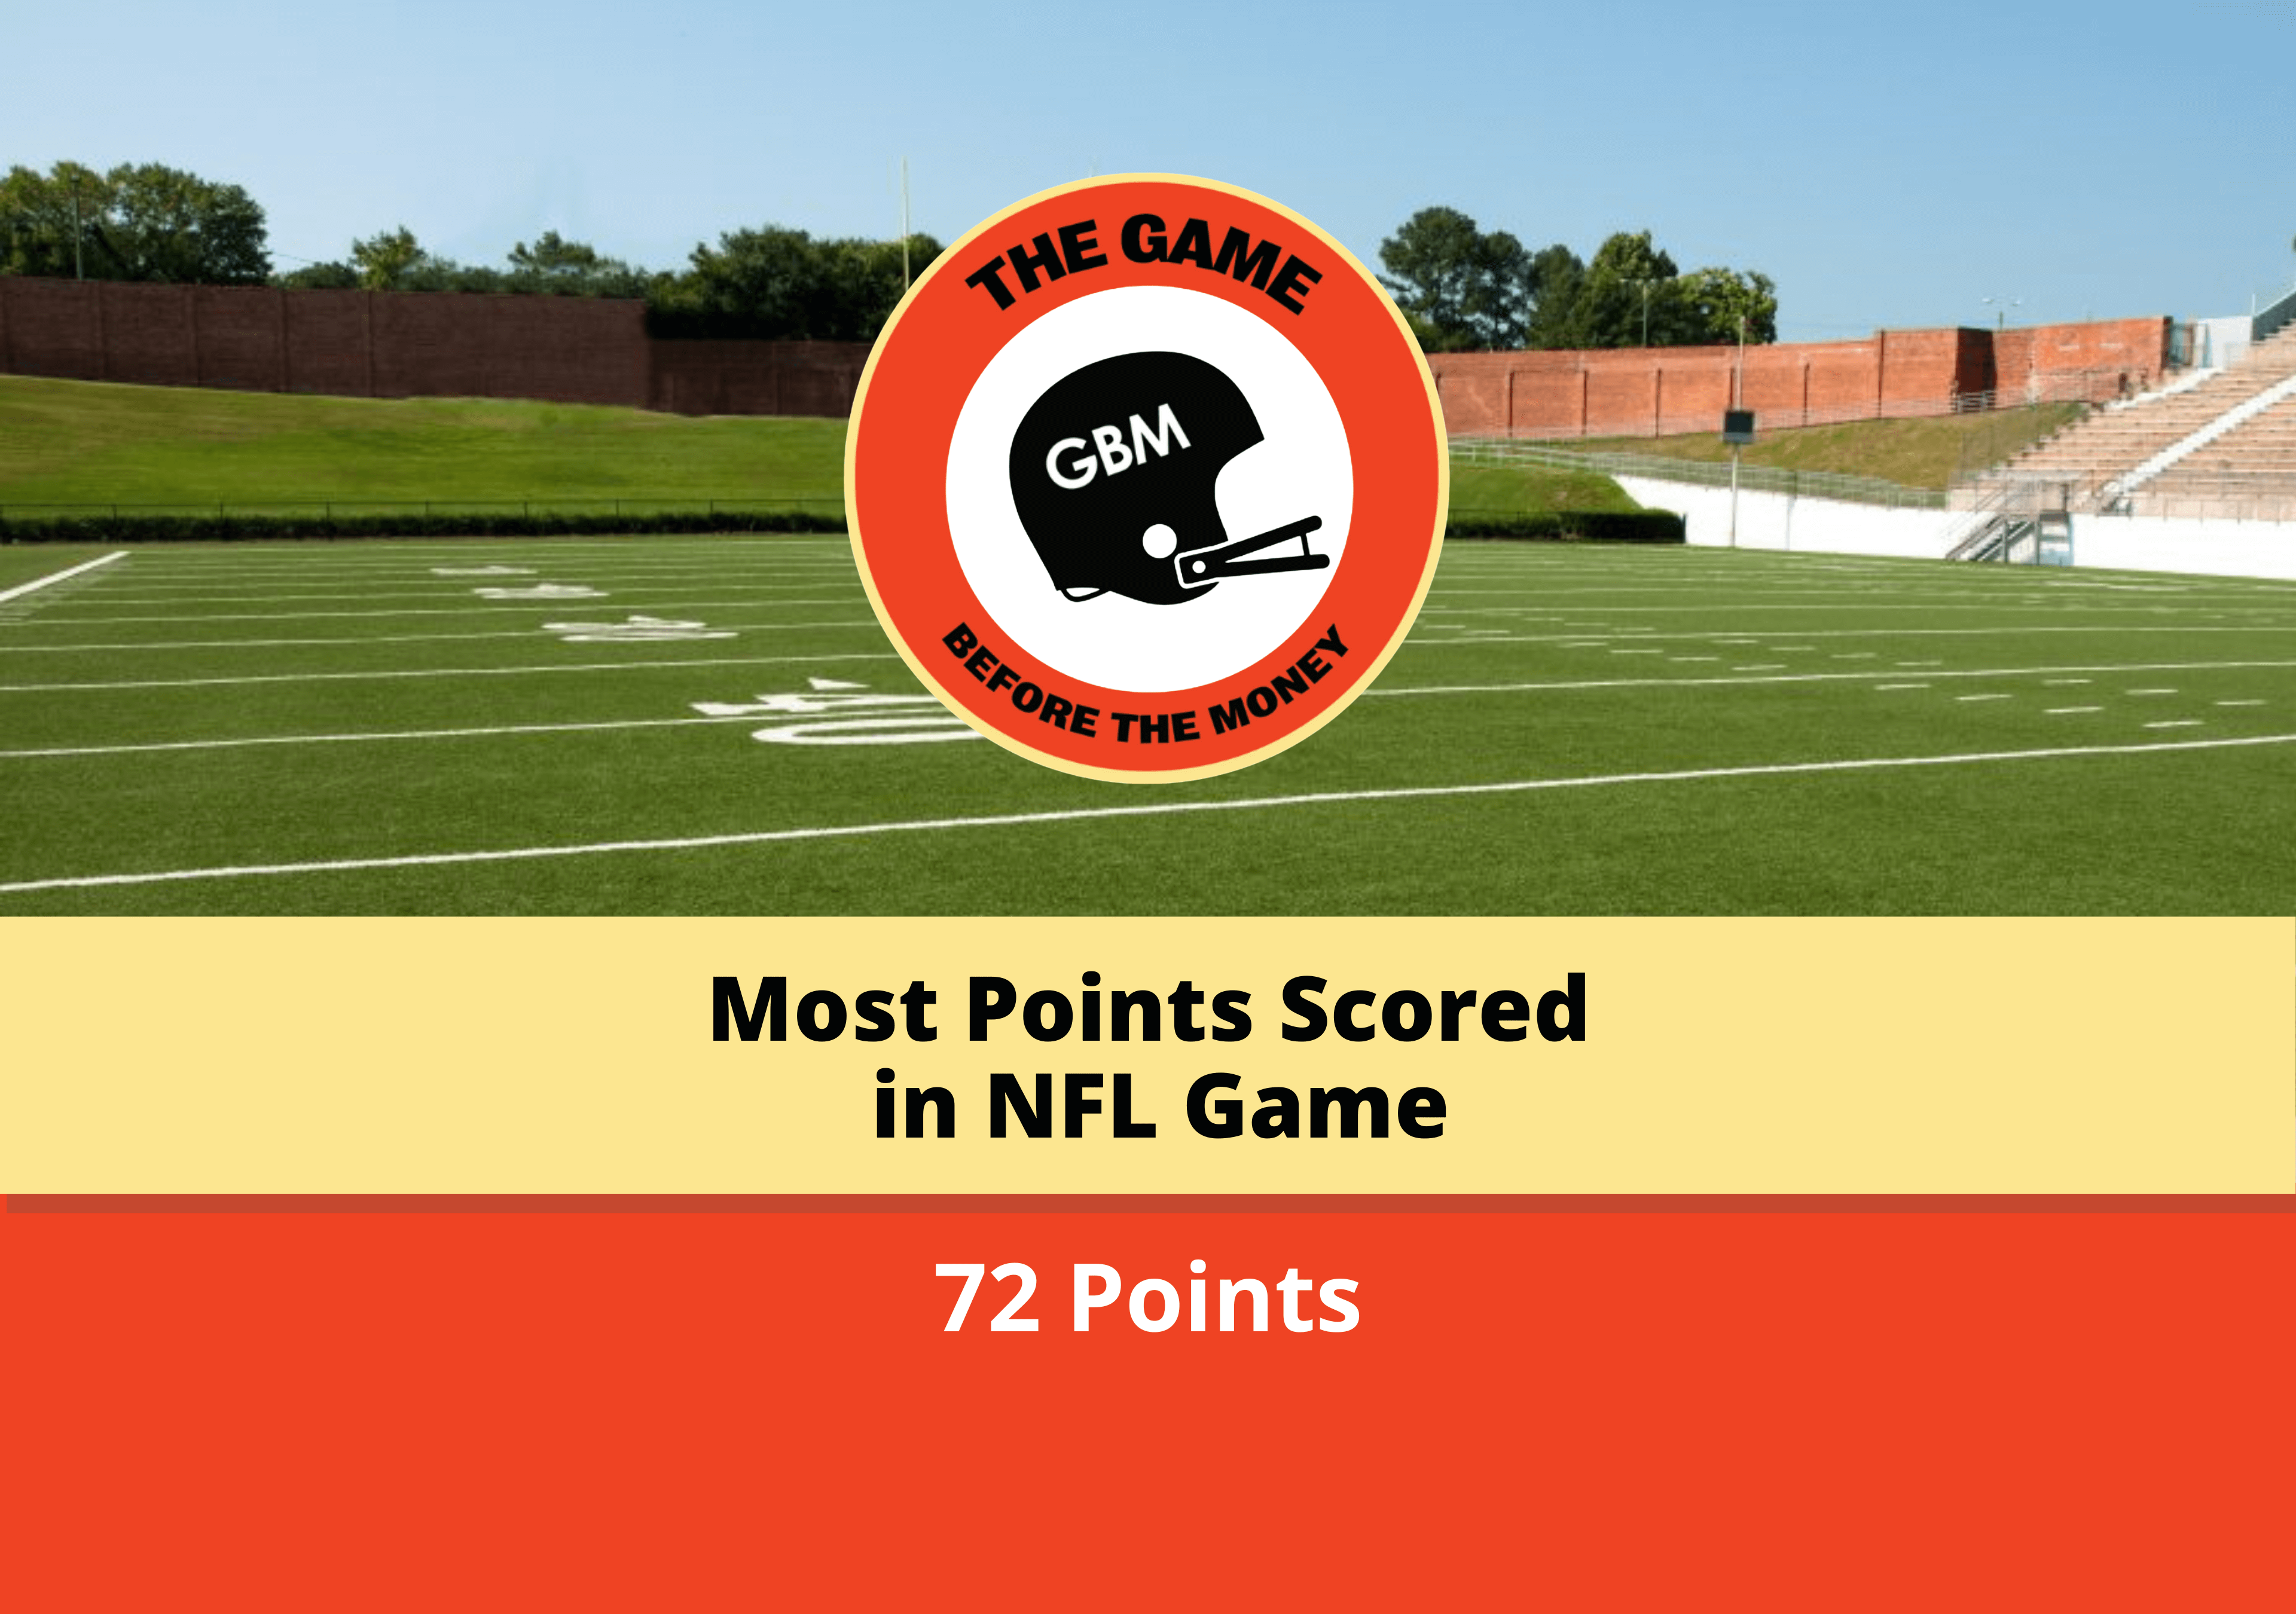 Most Points Scored in NFL Game